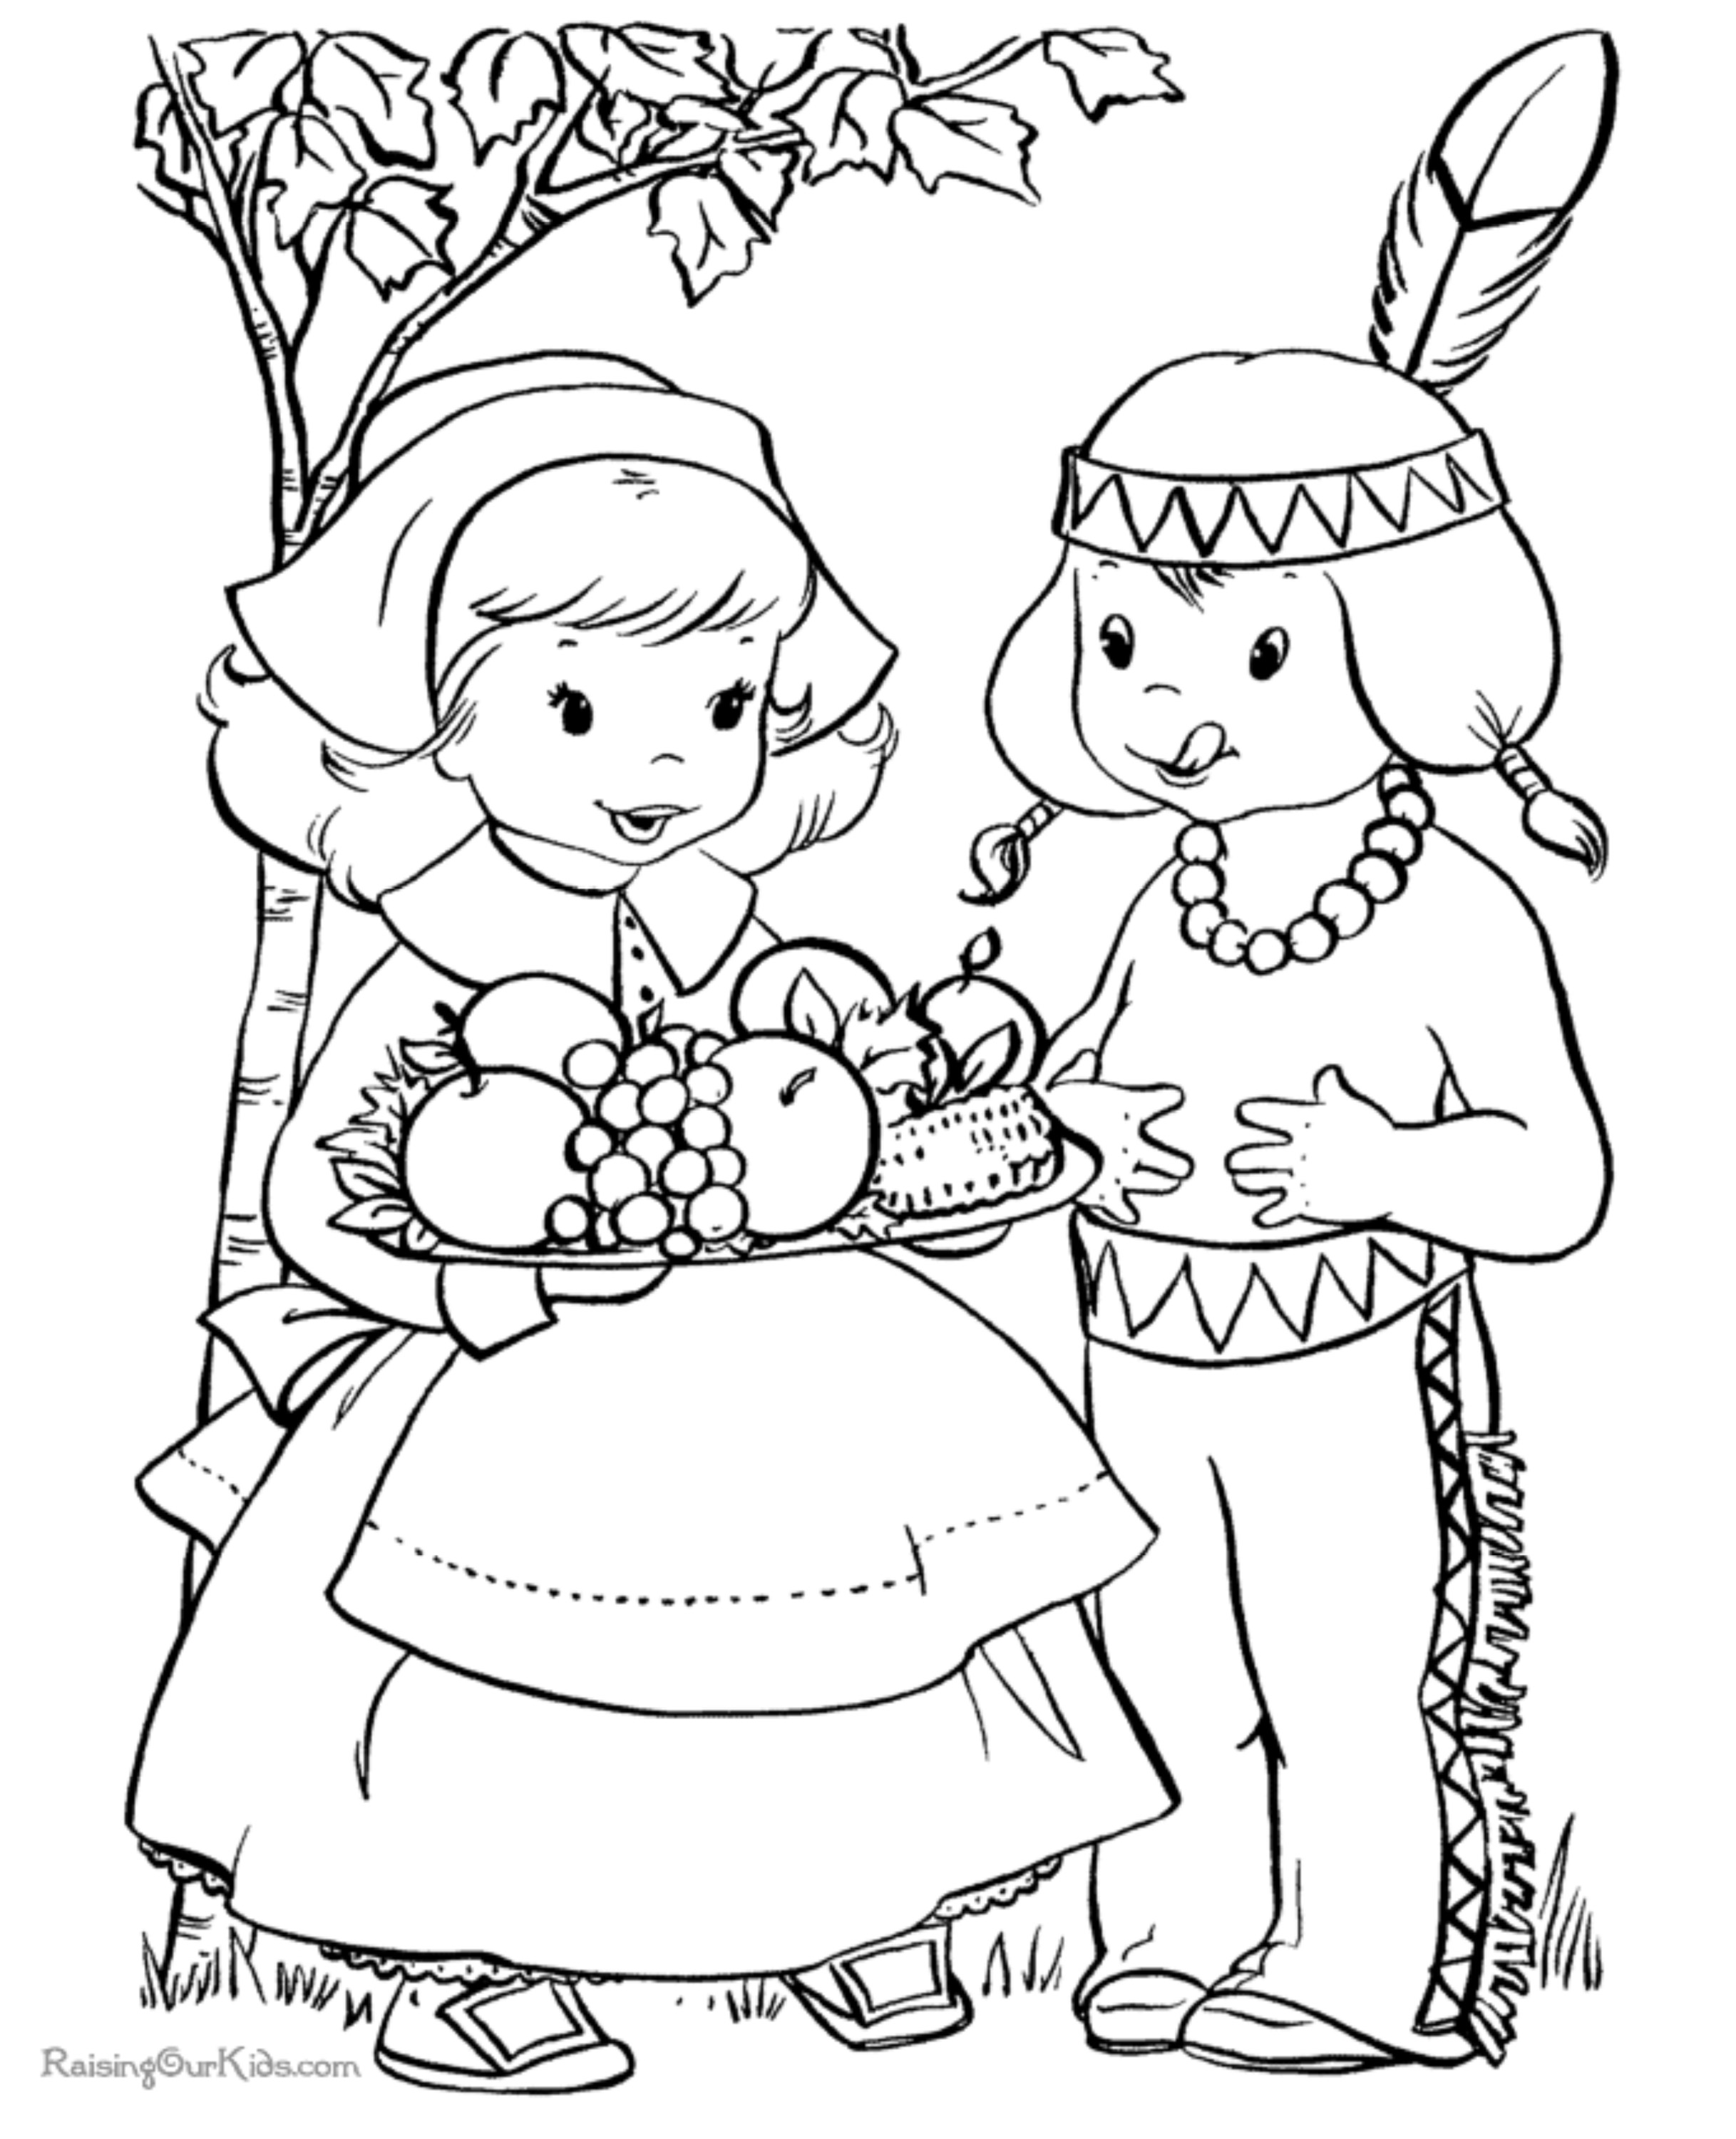 Thanksgiving coloring pages northern news